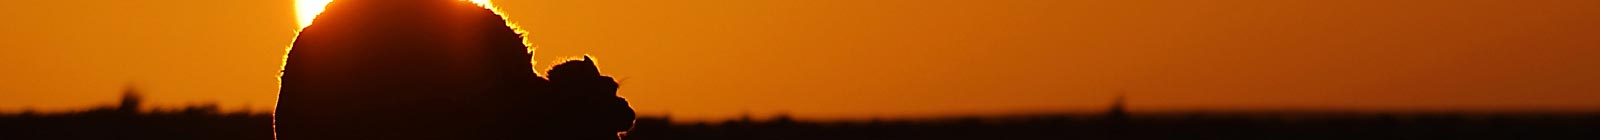 Camel escaping in red sun.